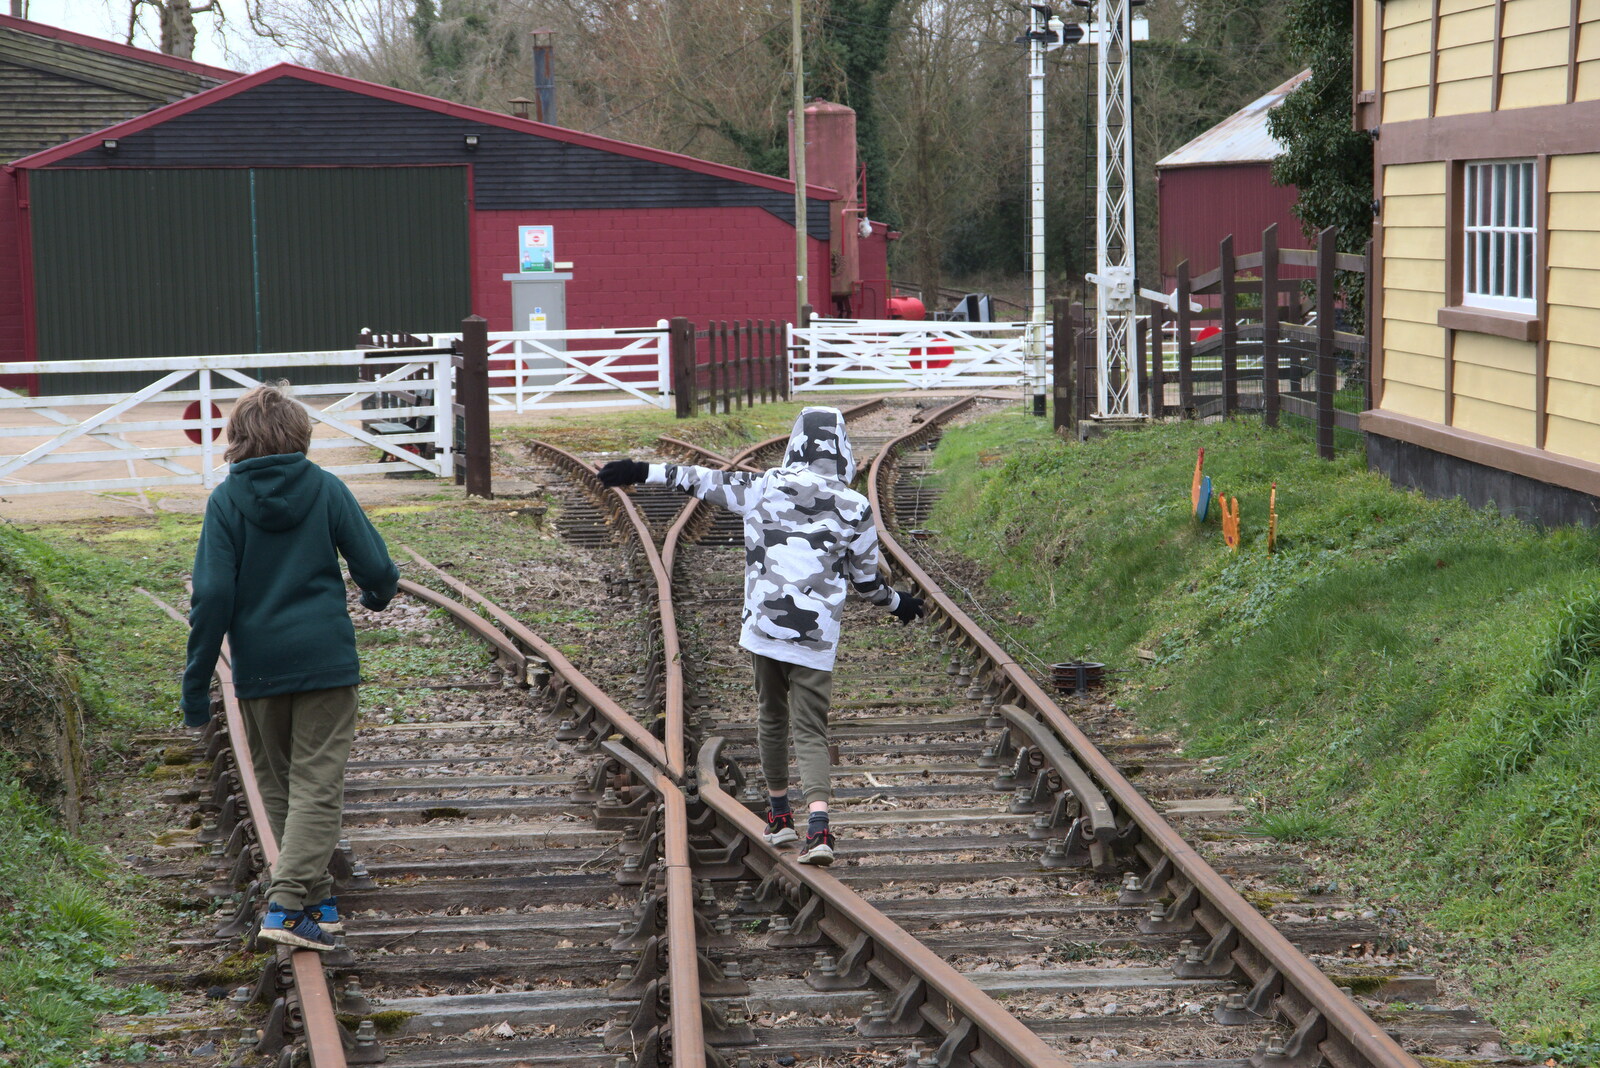 Fred and Harry walk on the rails from A Return to Bressingham Steam and Gardens, Bressingham, Norfolk - 28th March 2021